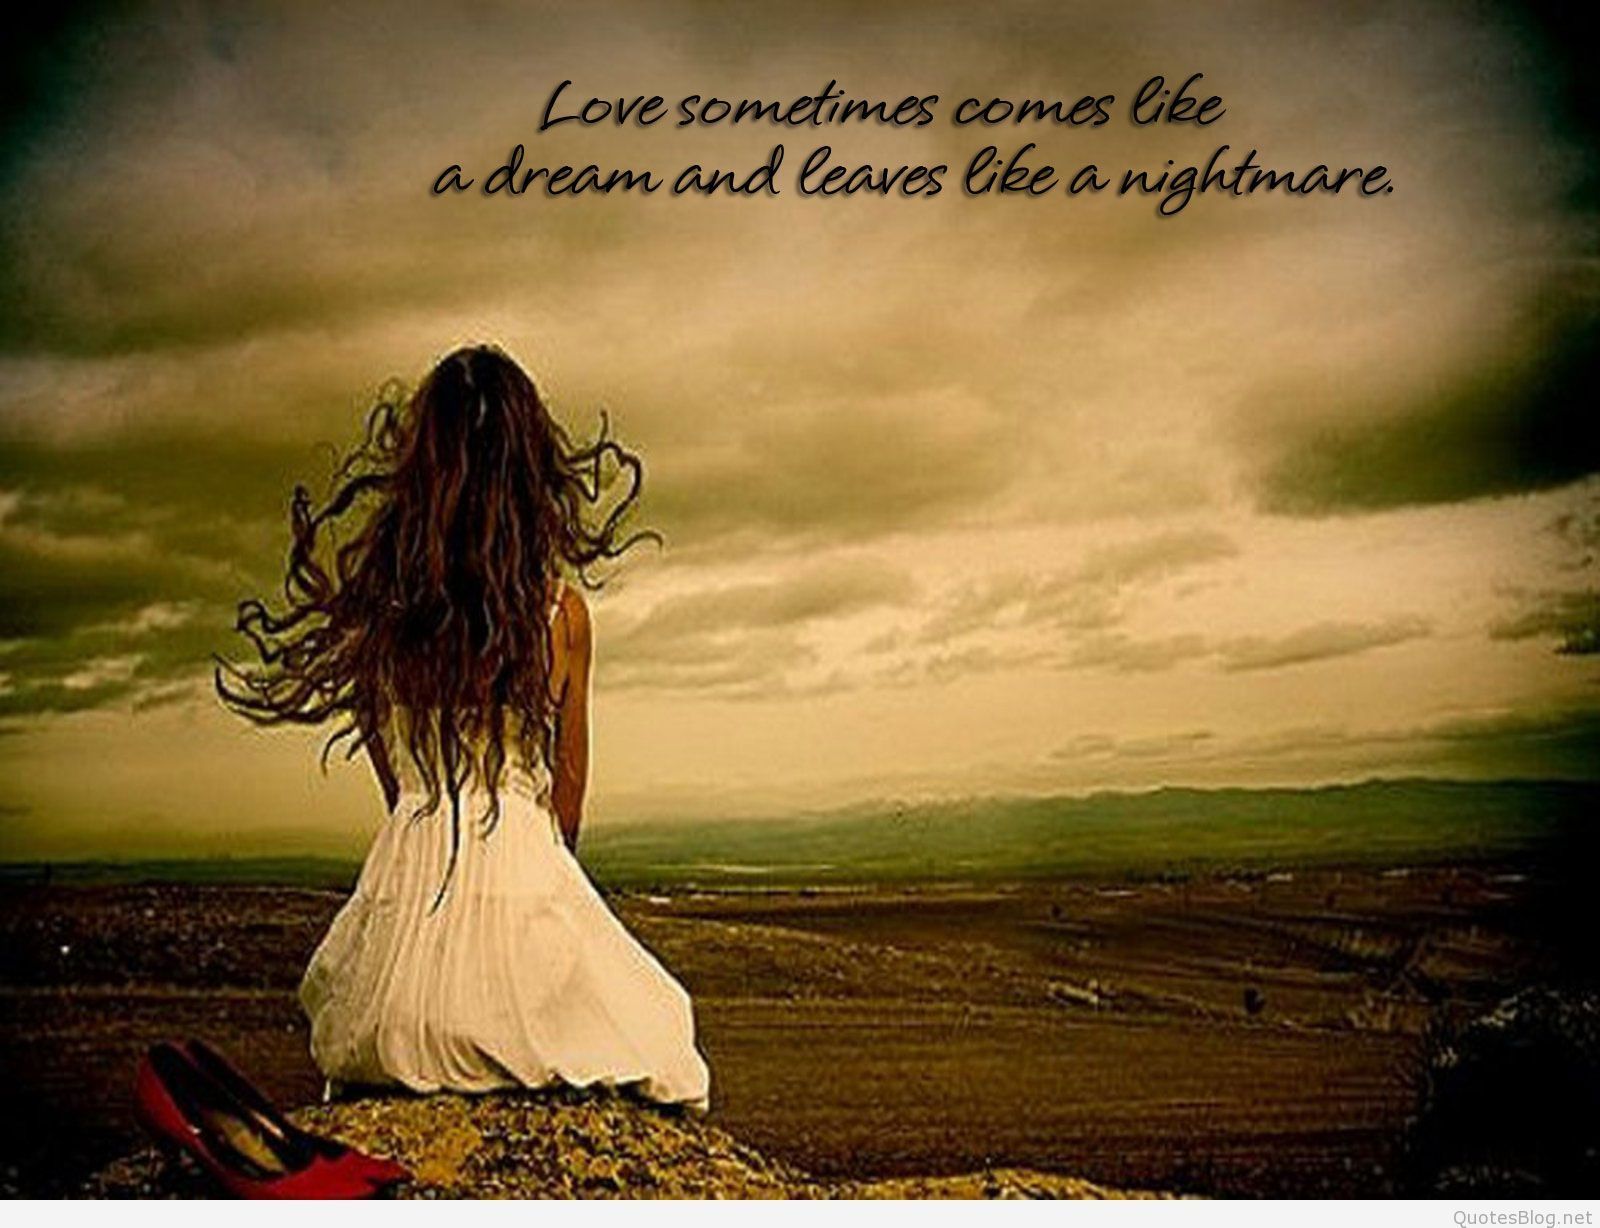 Sad Love Quotes On Emptiness. Love quotes collection within HD image